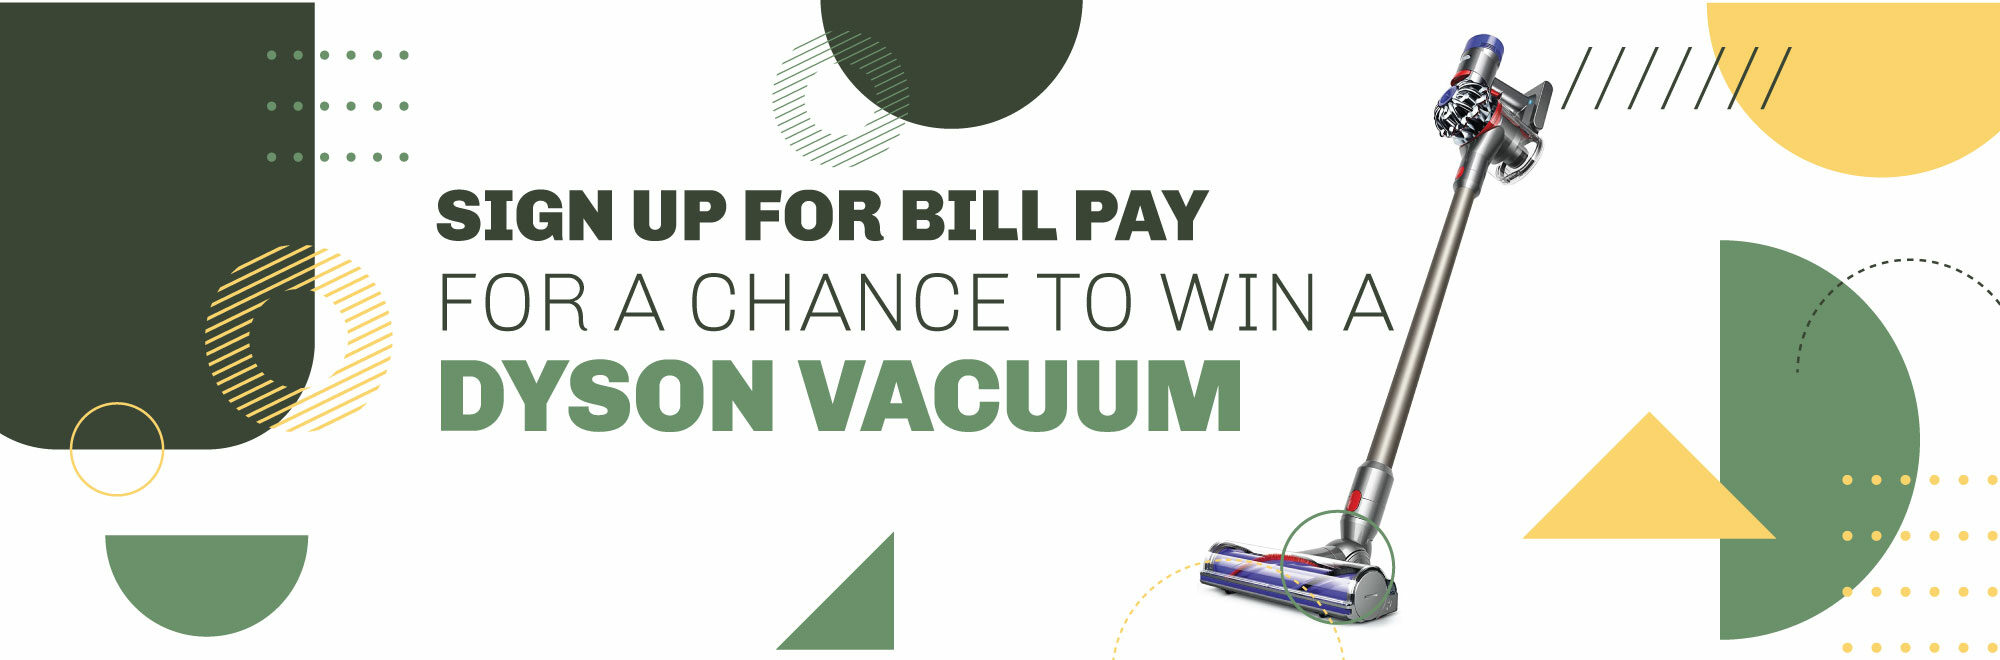 2022 Bill Pay Contest for Dyson Vacuum.